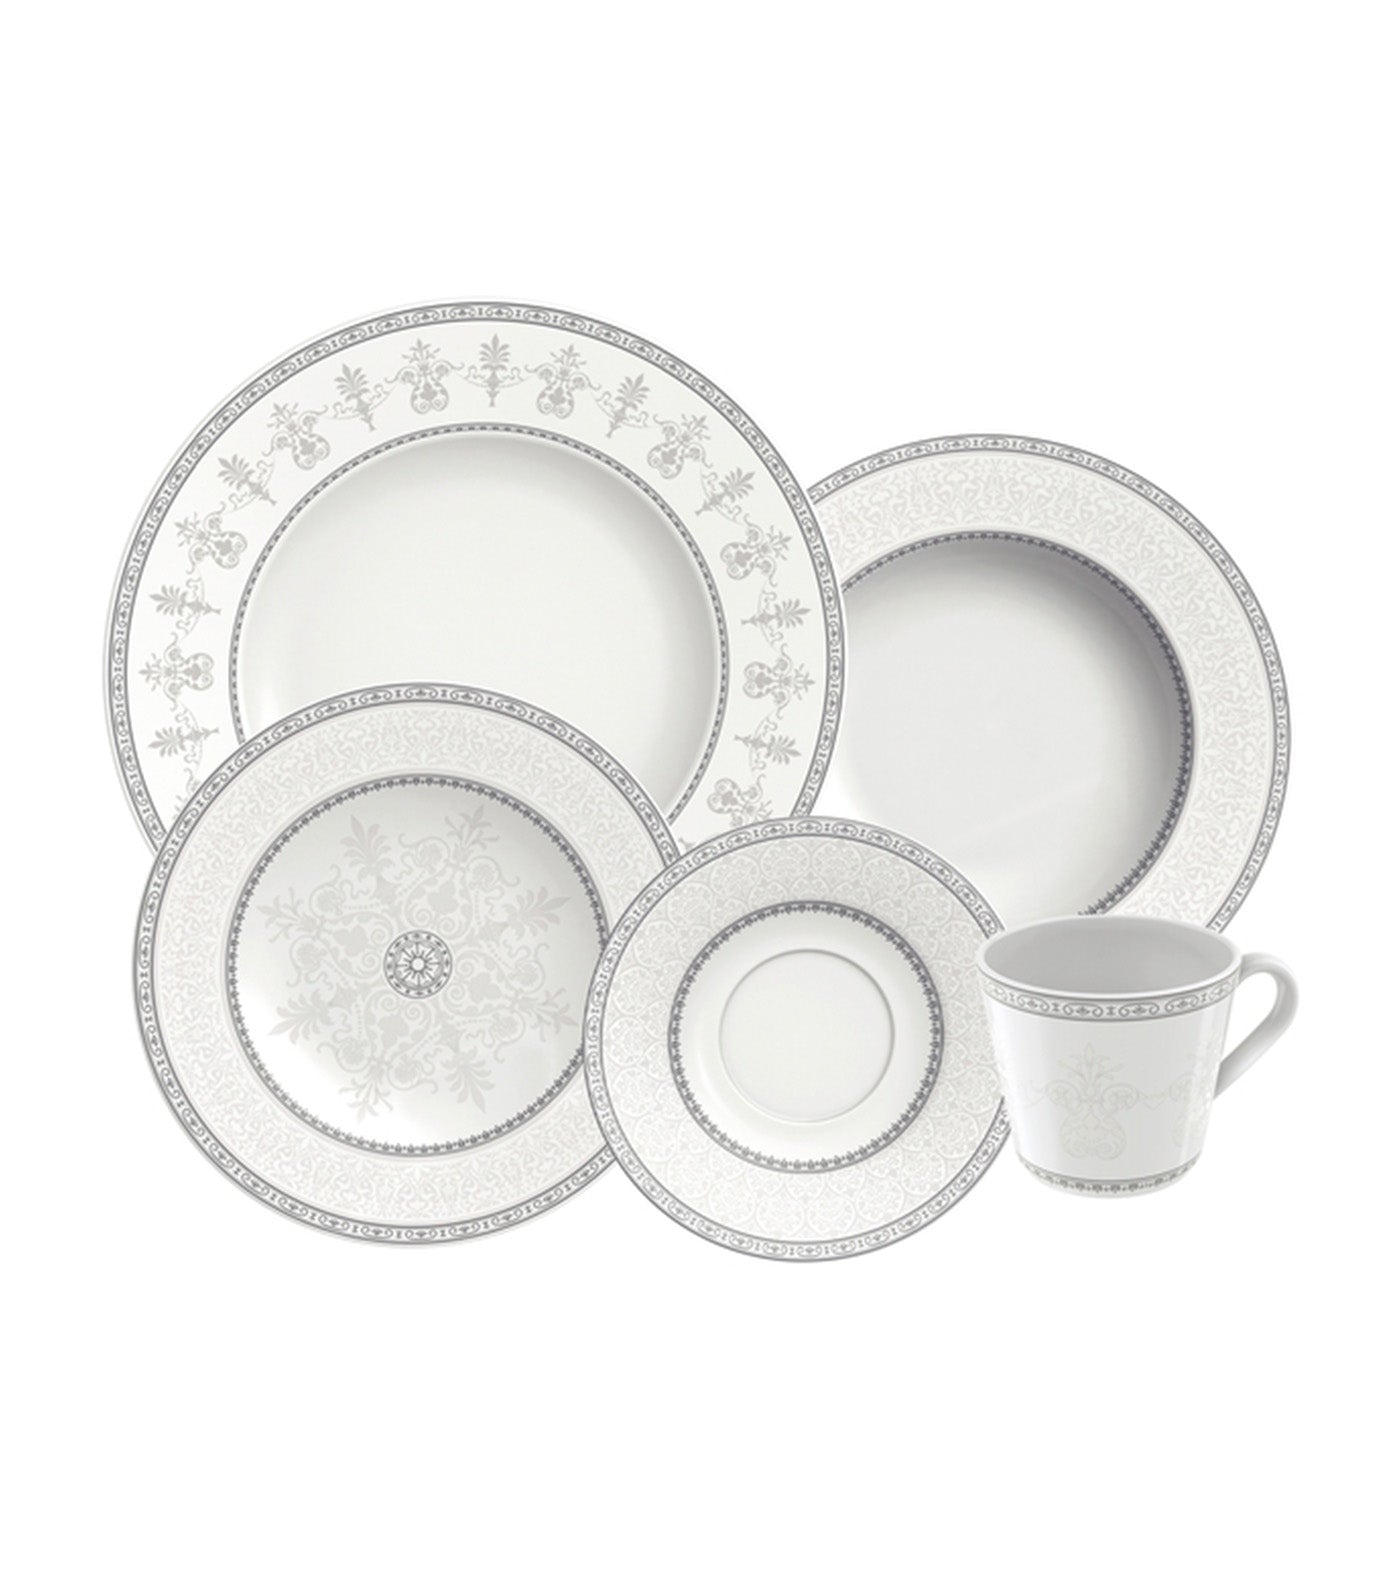 Tramontina Gabrielle Porcelain Collection